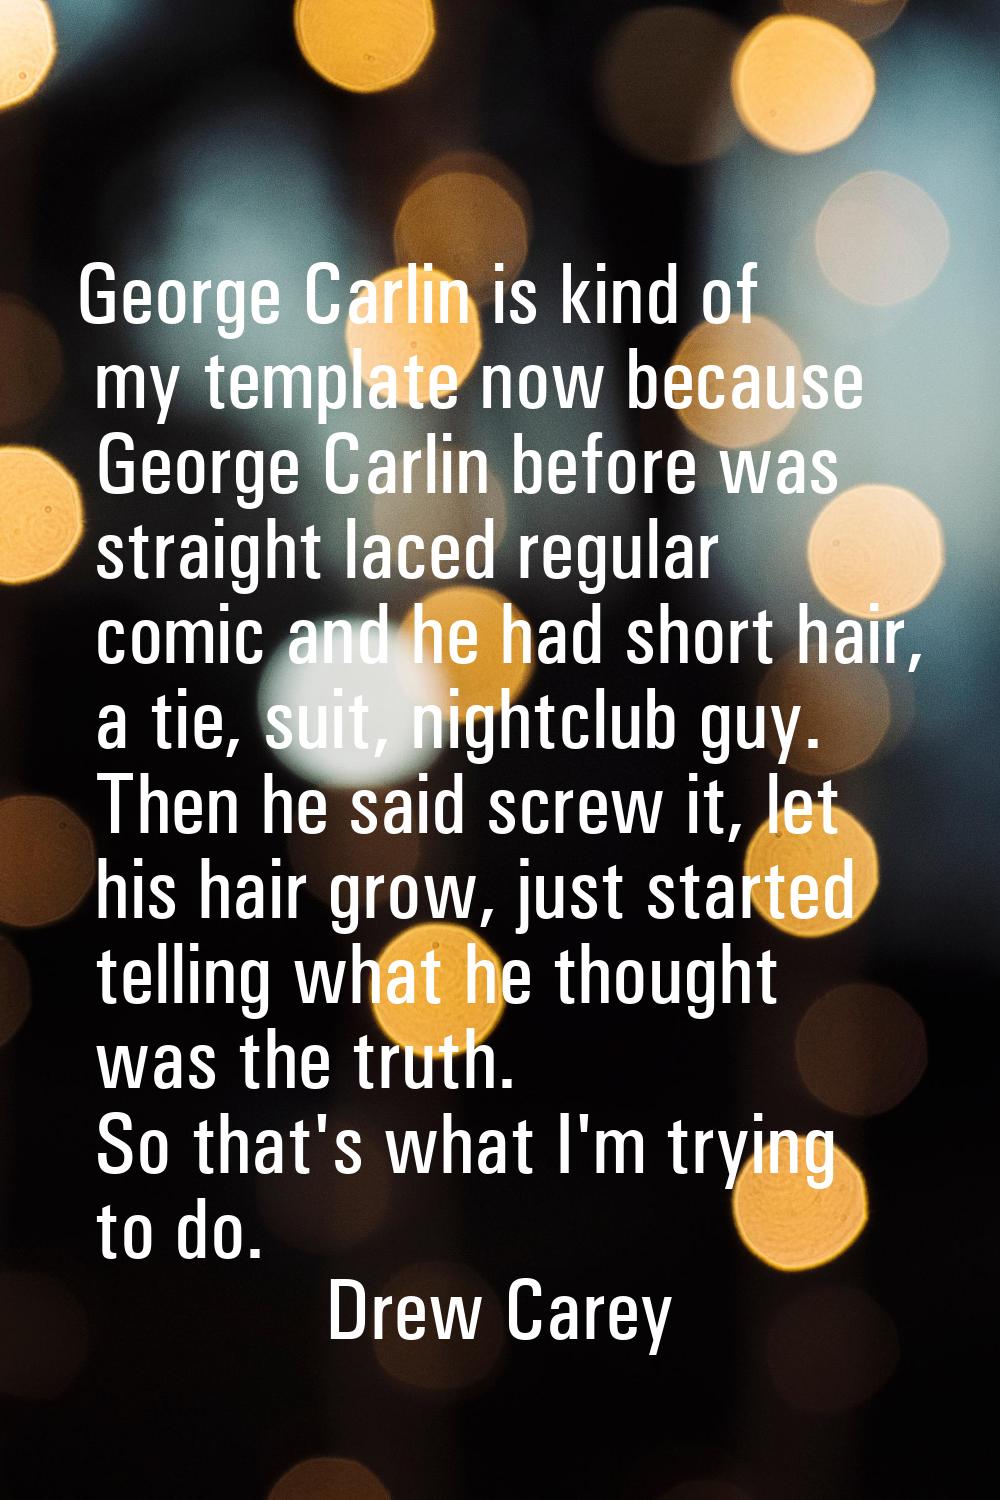 George Carlin is kind of my template now because George Carlin before was straight laced regular co